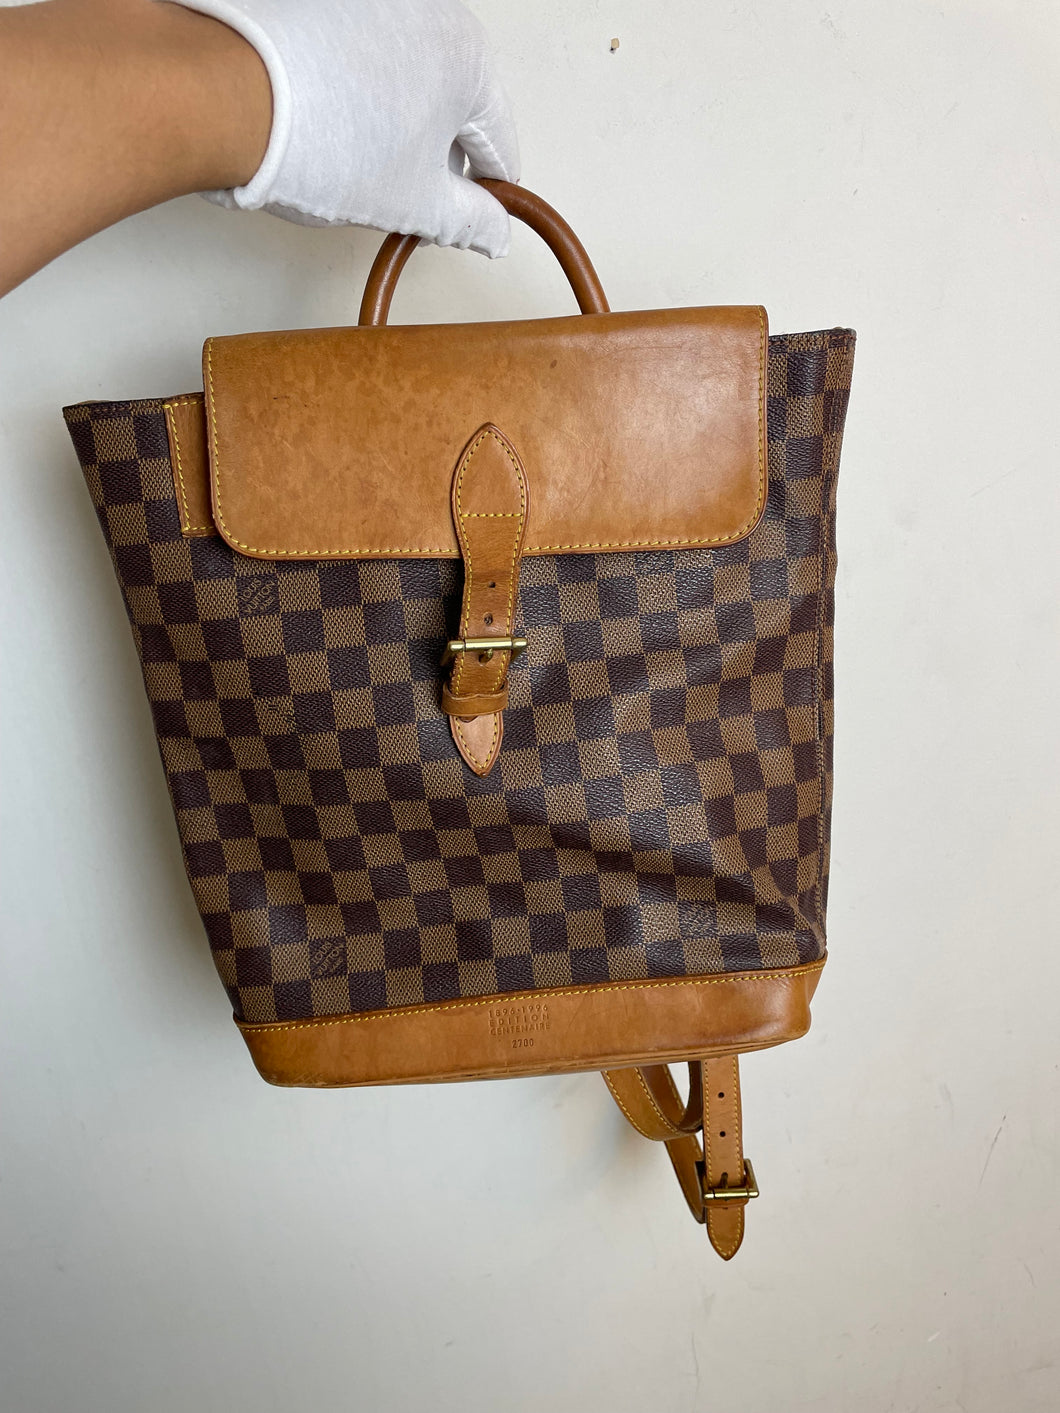 Louis Vuitton damier 1996 limited edition bag backpack